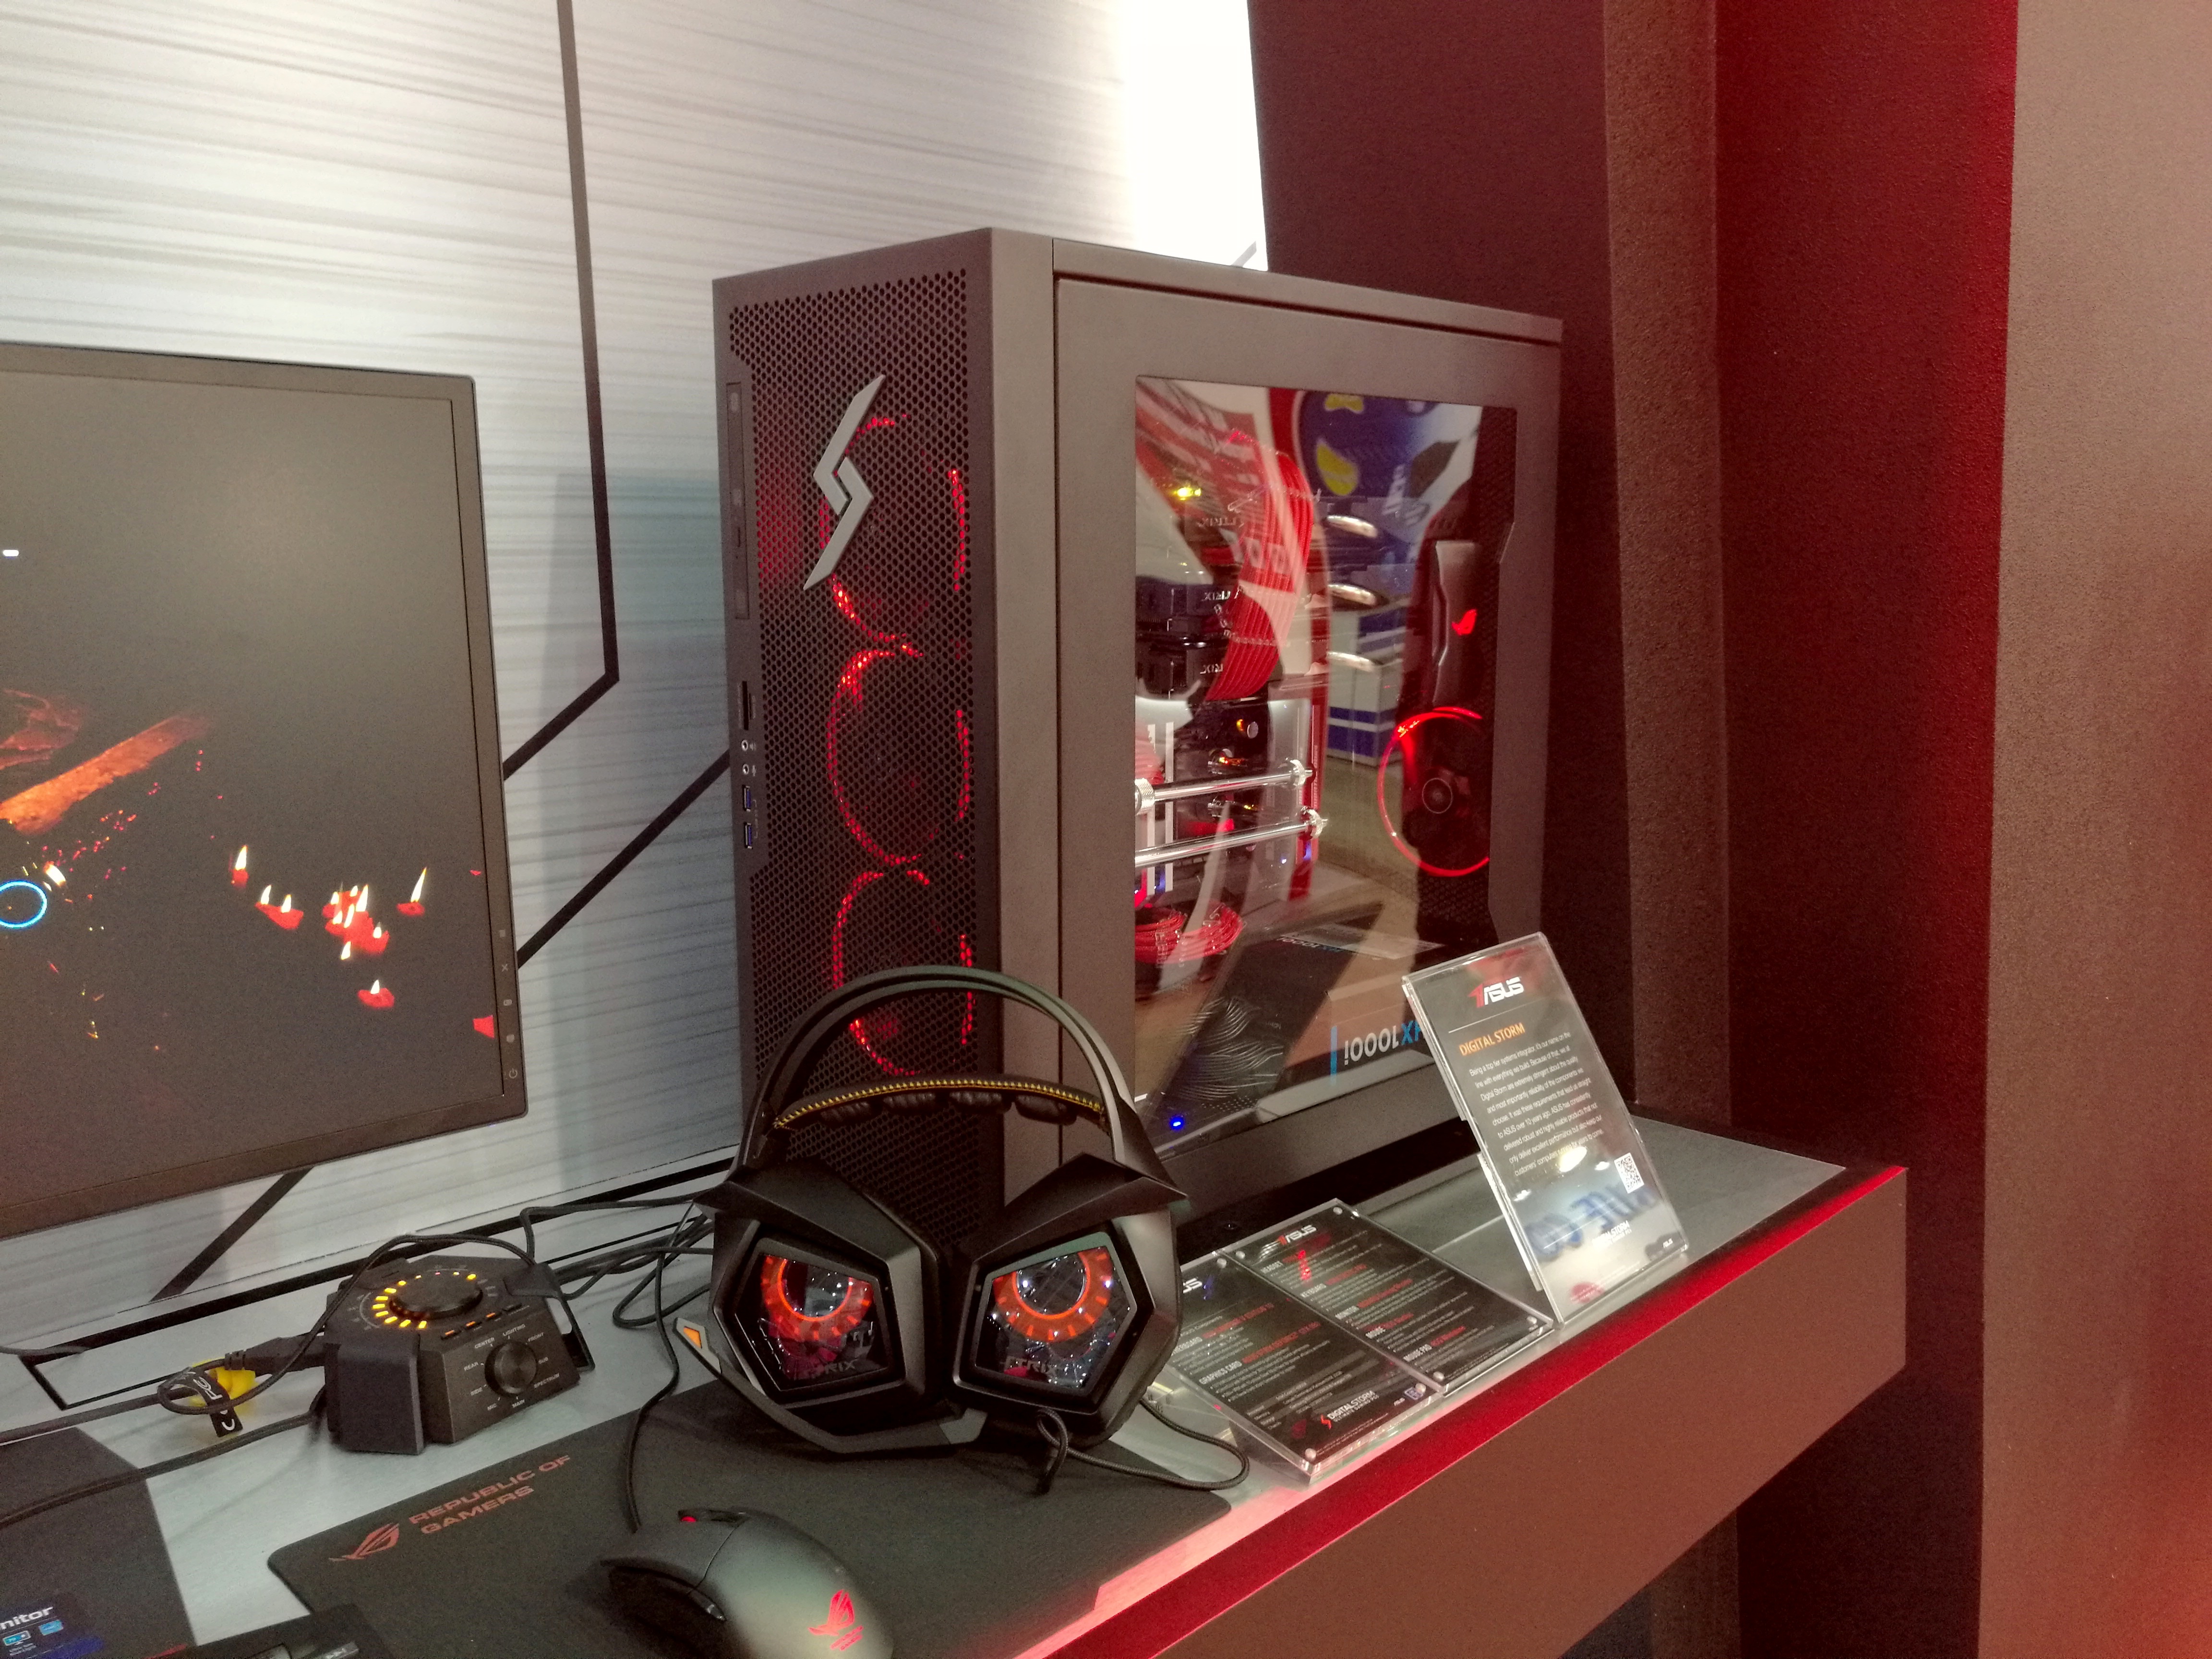 Non Rog Modded Systems Asus At Computex 2016 The 10 Years Of